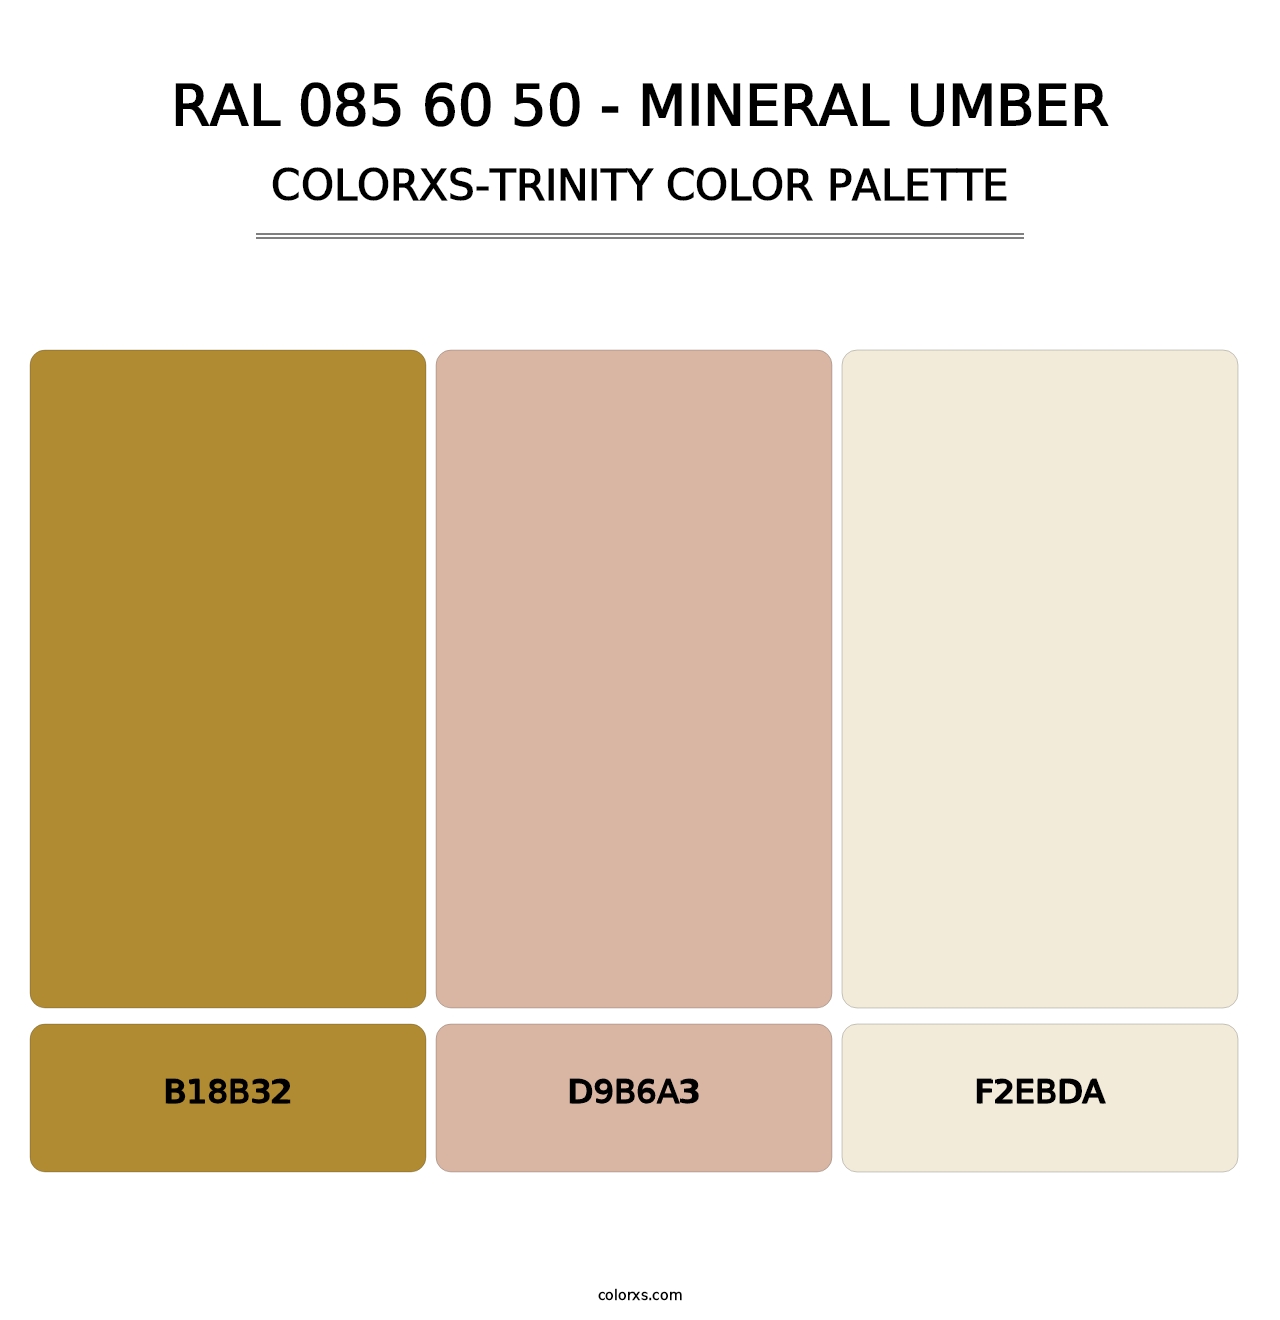 RAL 085 60 50 - Mineral Umber - Colorxs Trinity Palette